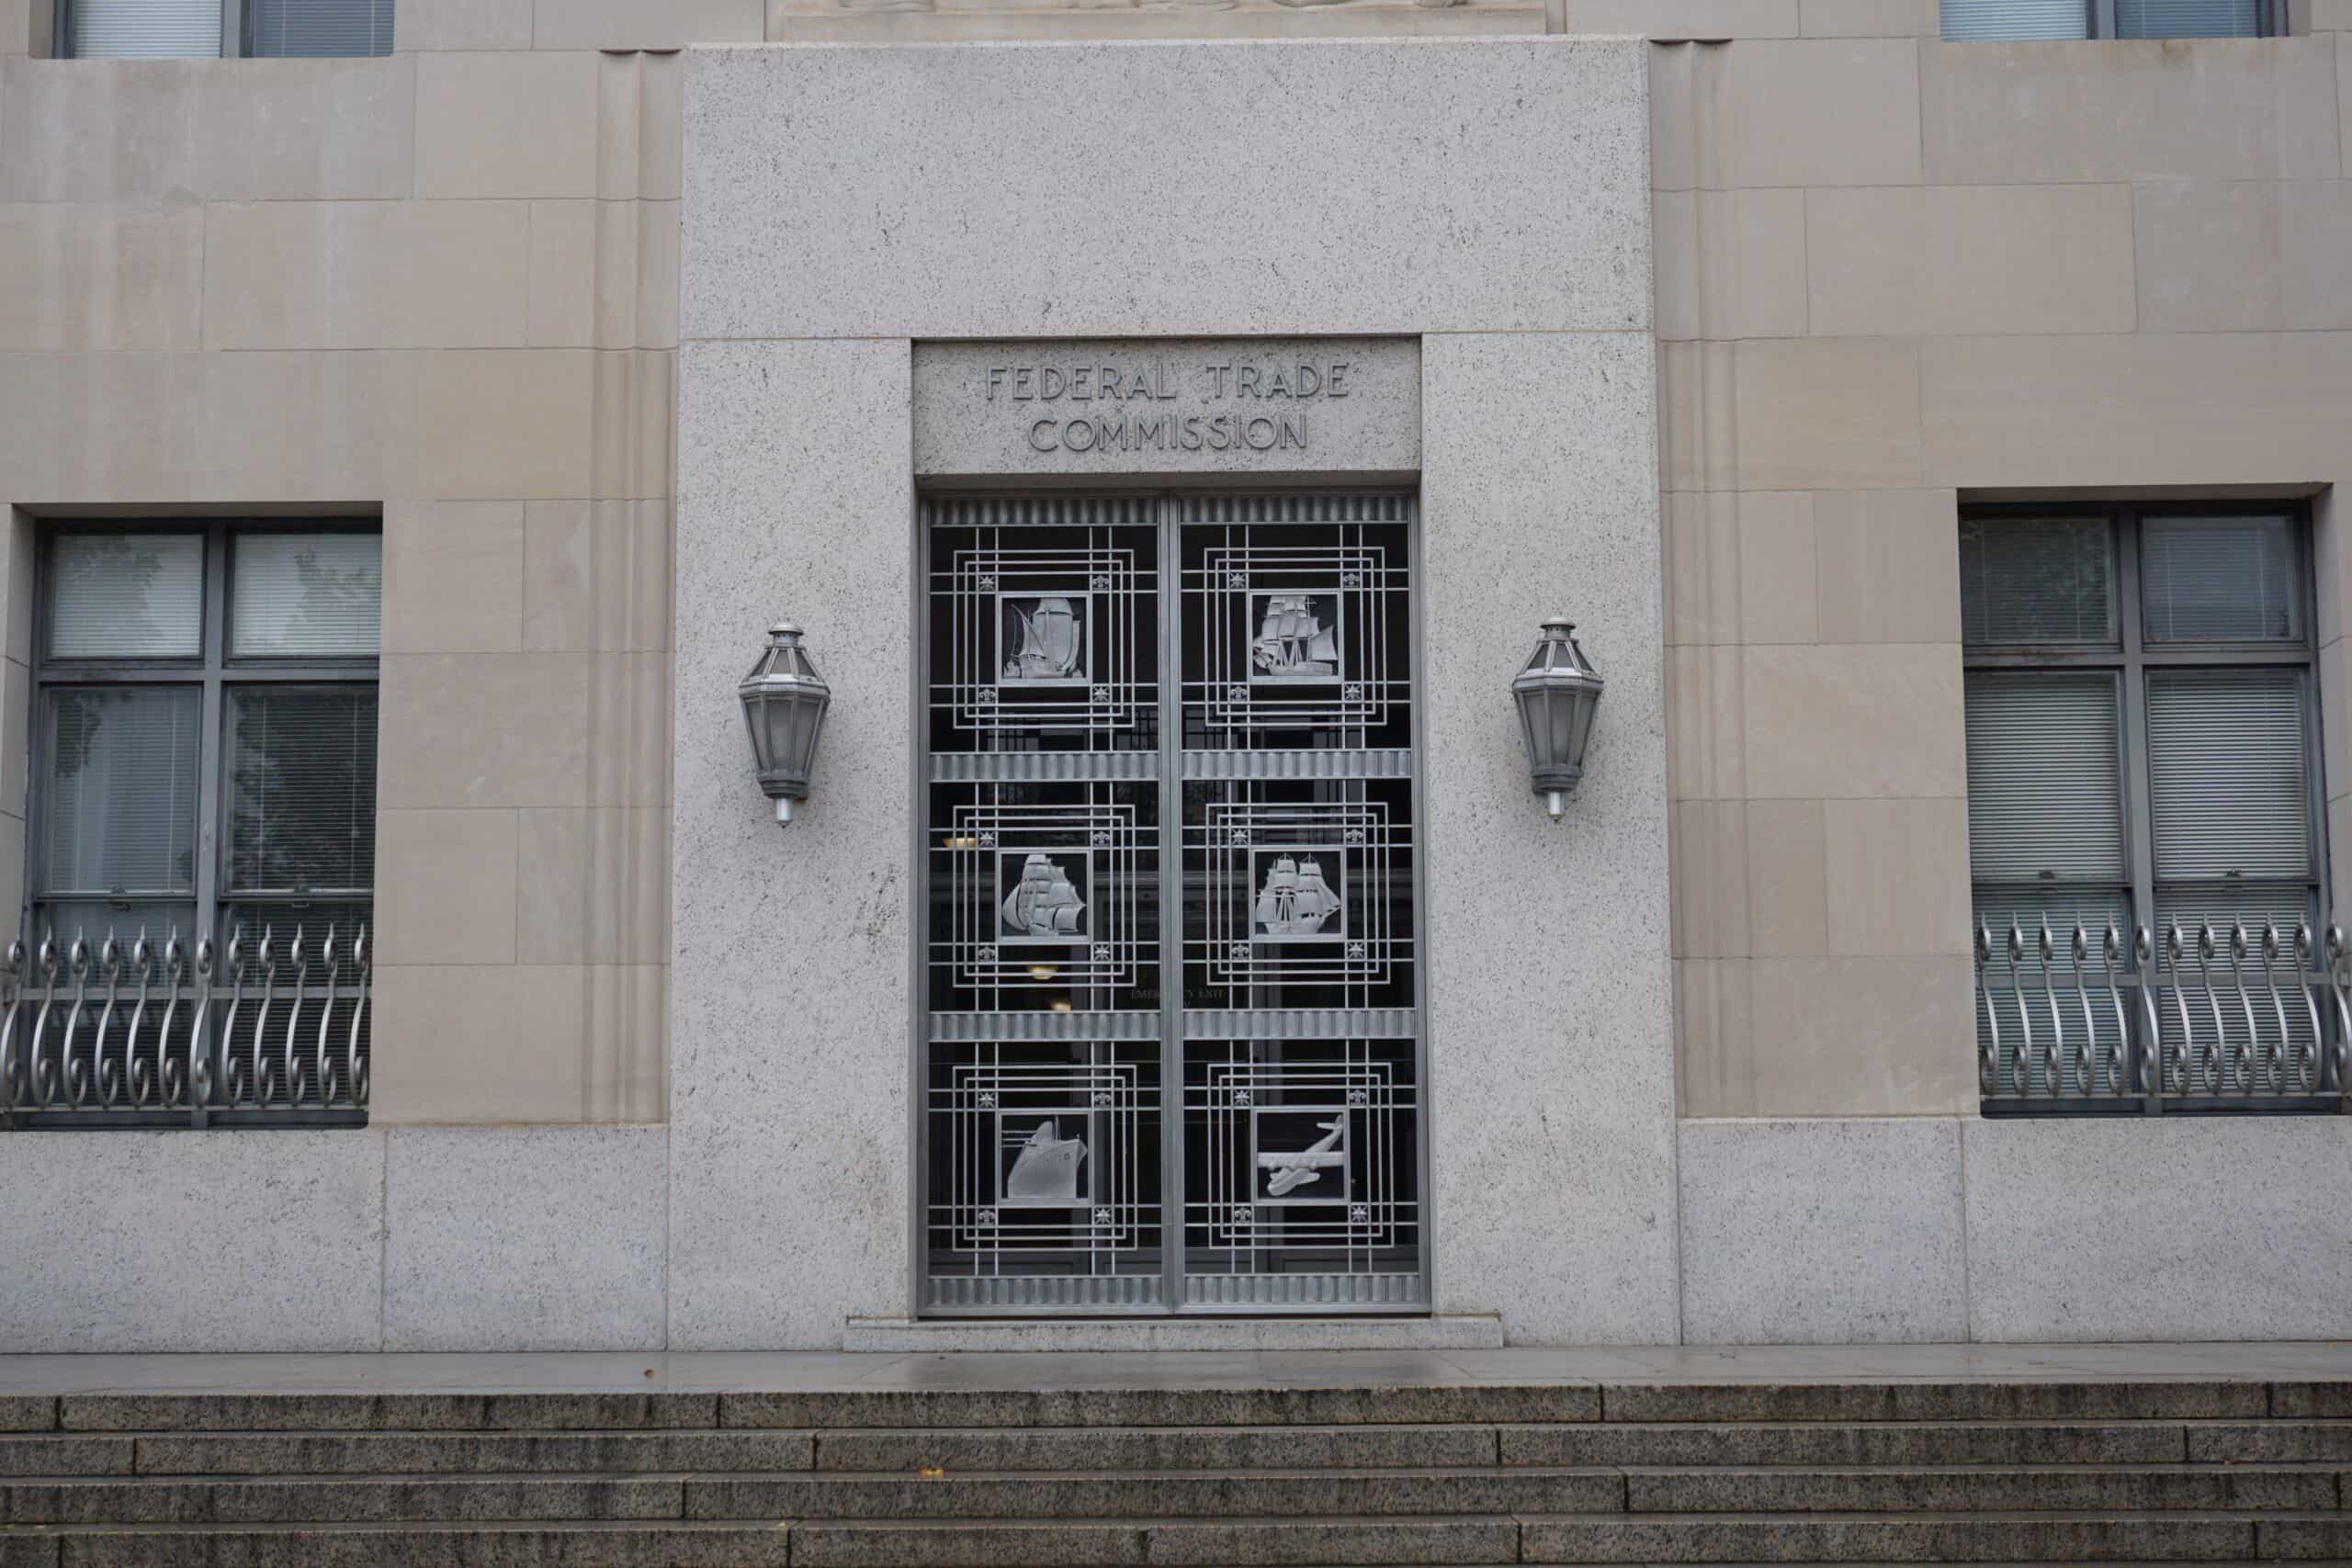 Federal Trade Commission Front Door